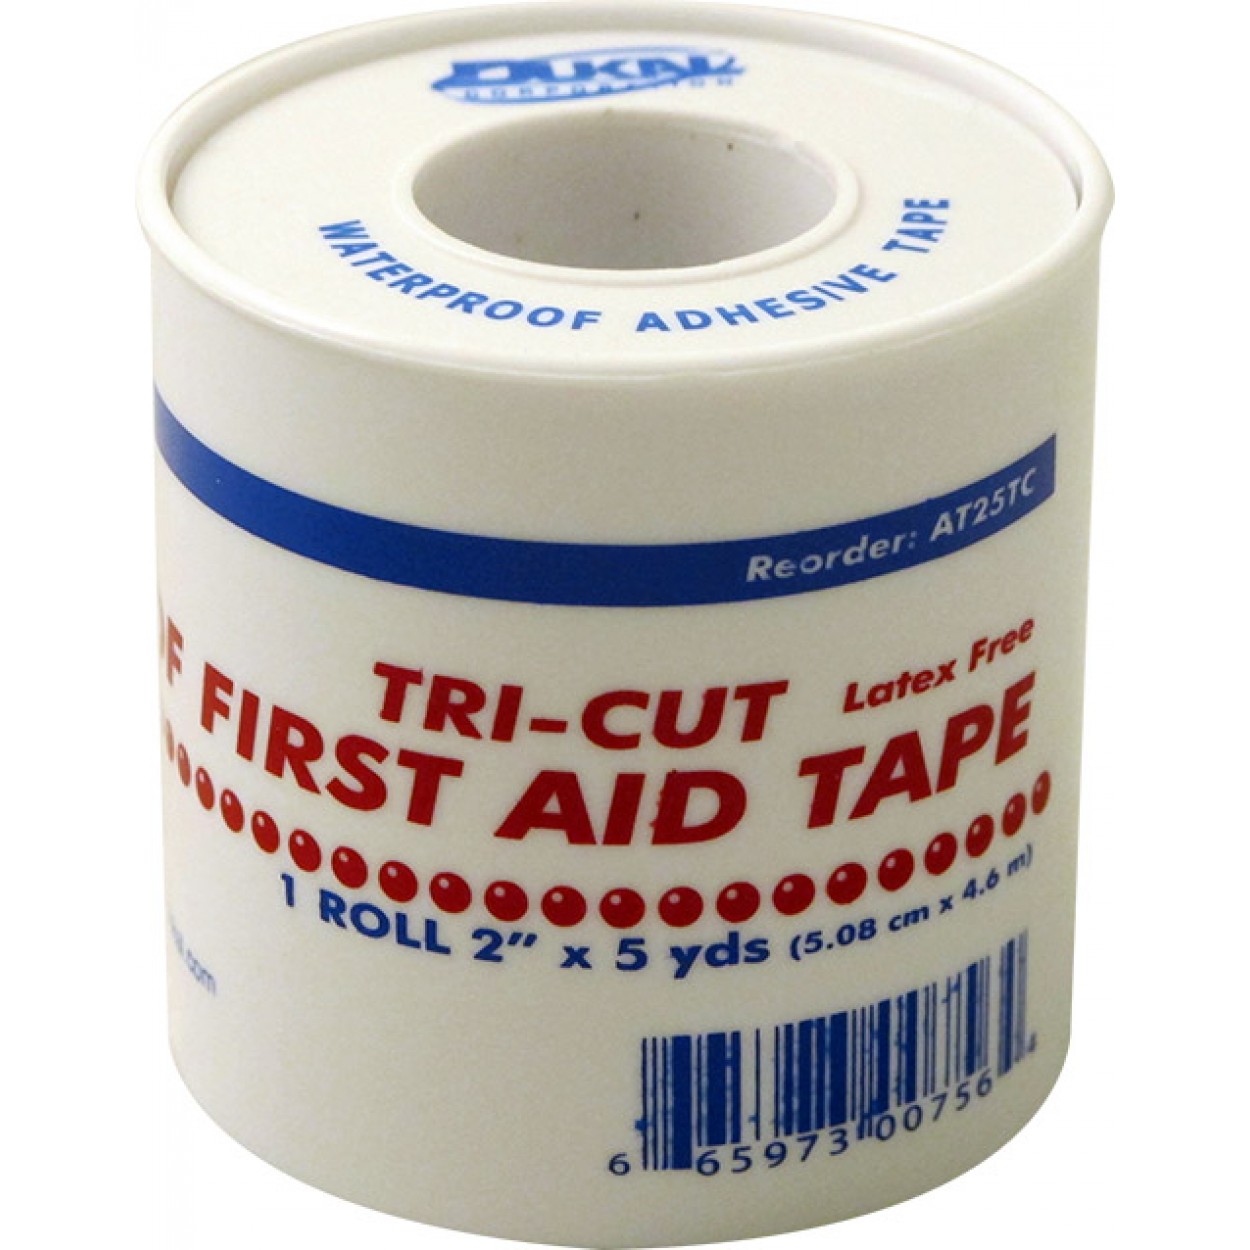 How To Use Adhesive Tape In First Aid